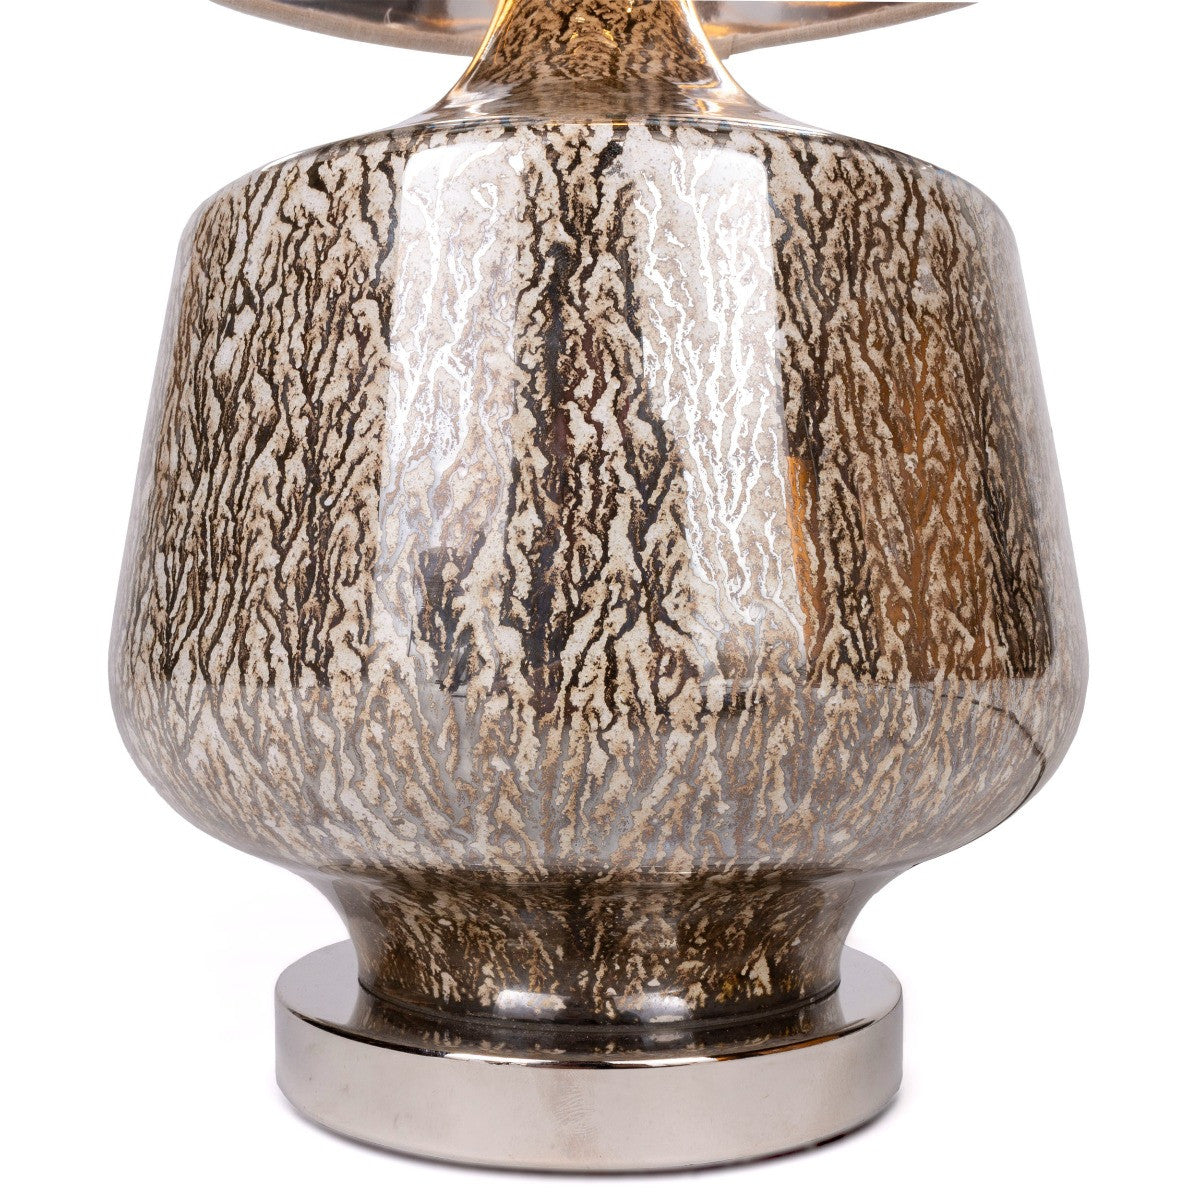 21" Silver Metallic Glass LED Table Lamp With Beige Drum Shade